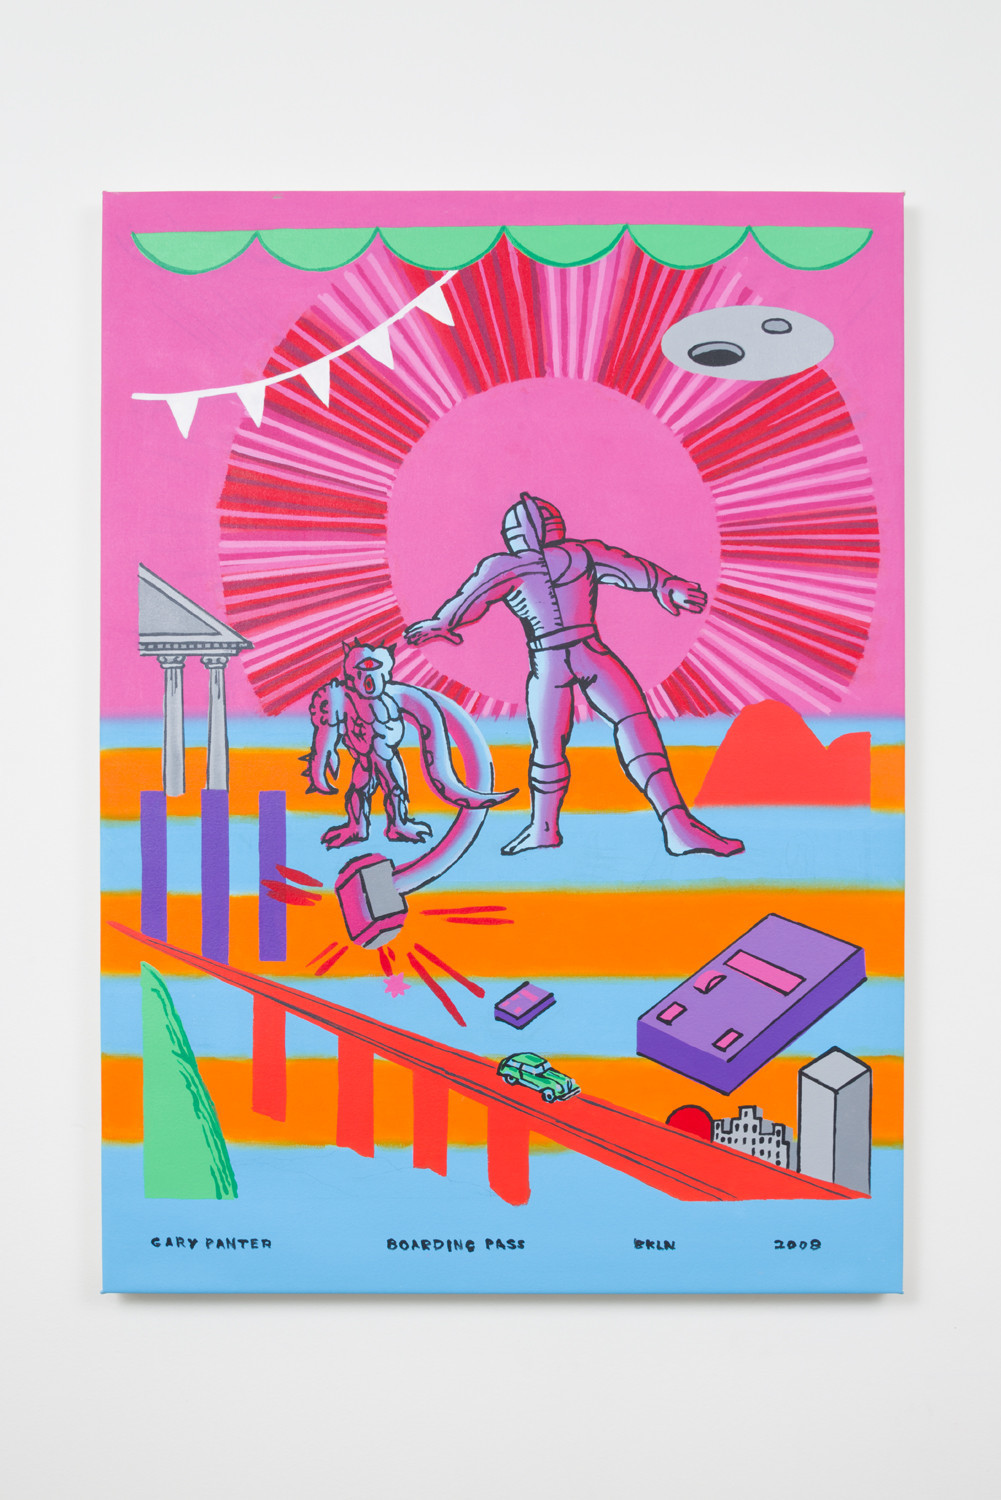 Gary Panter's “Boarding Pass,” 2008, acrylic on canvas, 48.5 inches by 35.5 inches